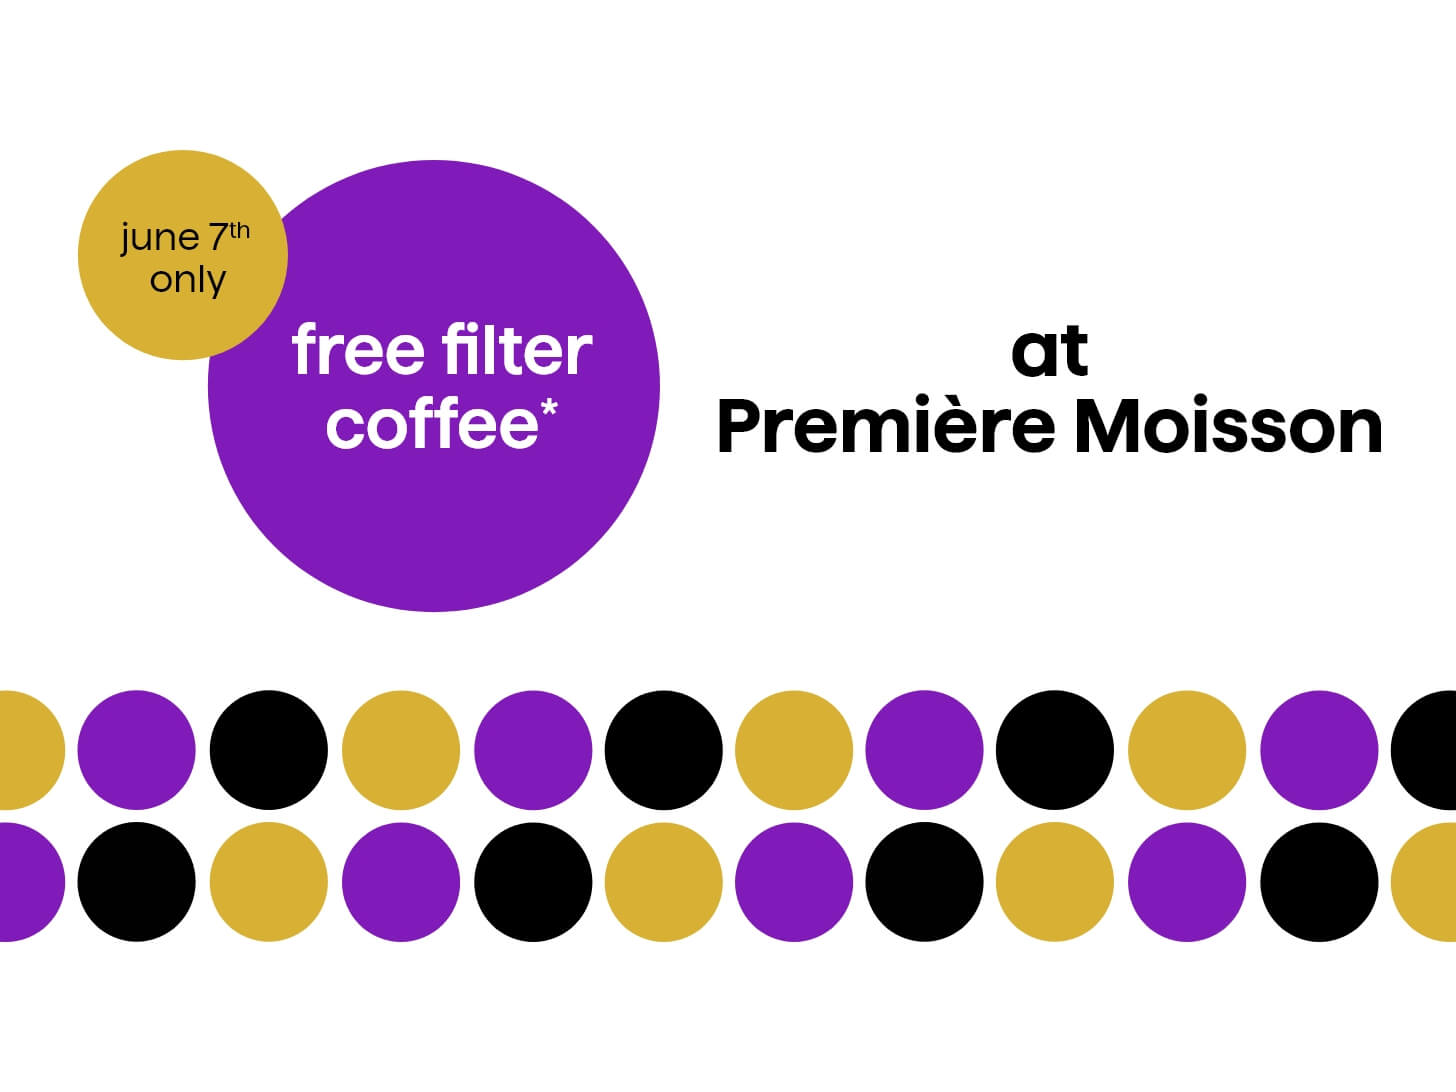 june 17 only - free filter coffee at Première Moisson